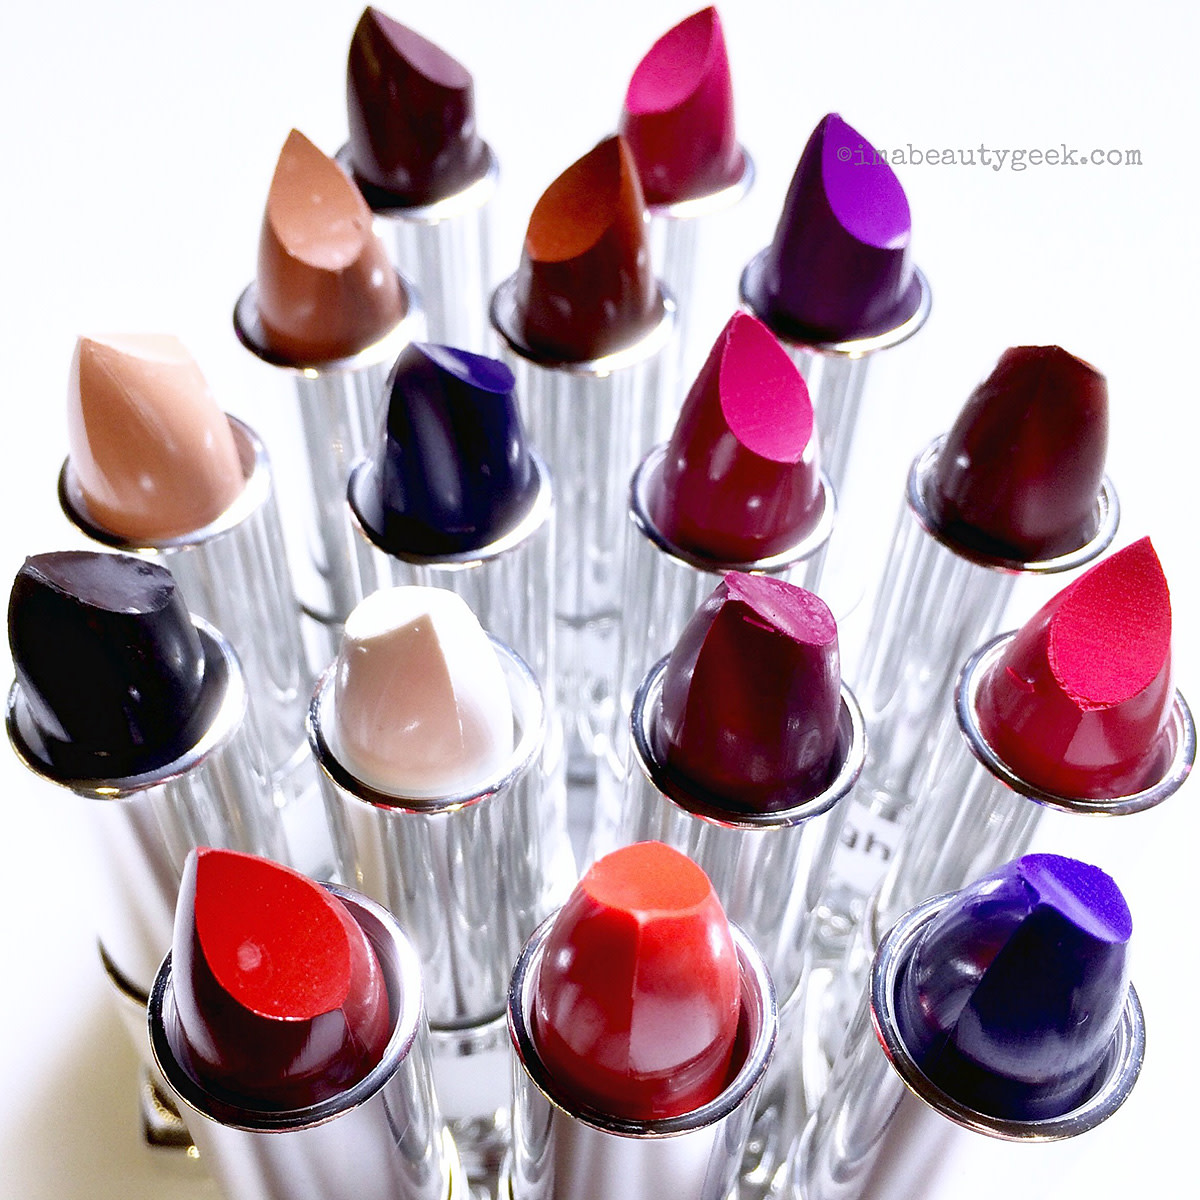 Okay, one more shot of 15 of the 16 Maybelline ColorSensational Loaded Bolds lipsticks Canada will have.